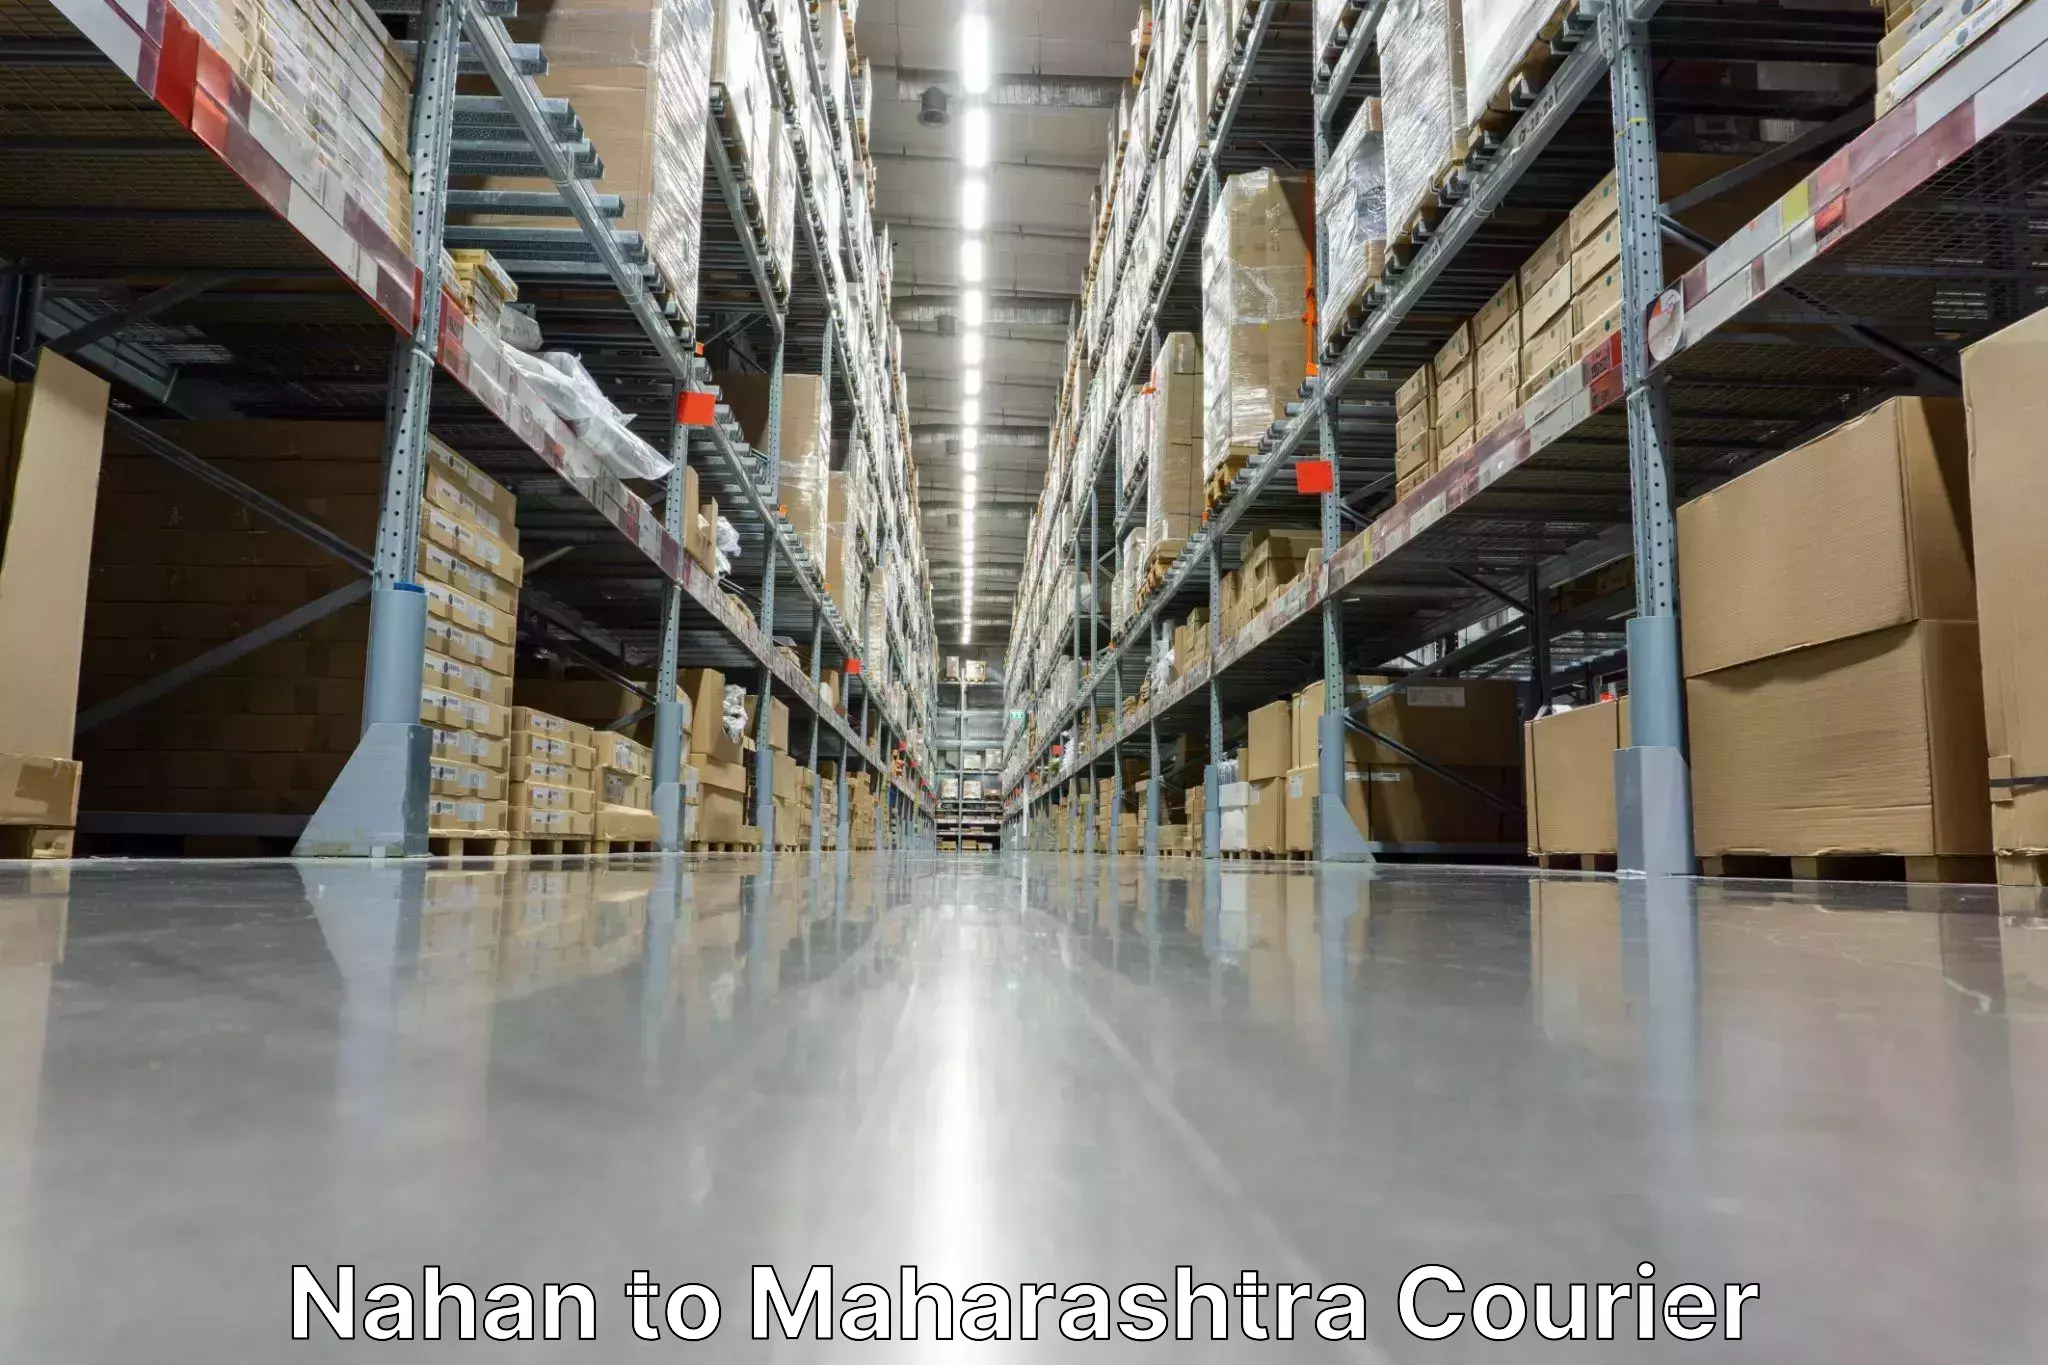 State-of-the-art courier technology Nahan to Gadchiroli